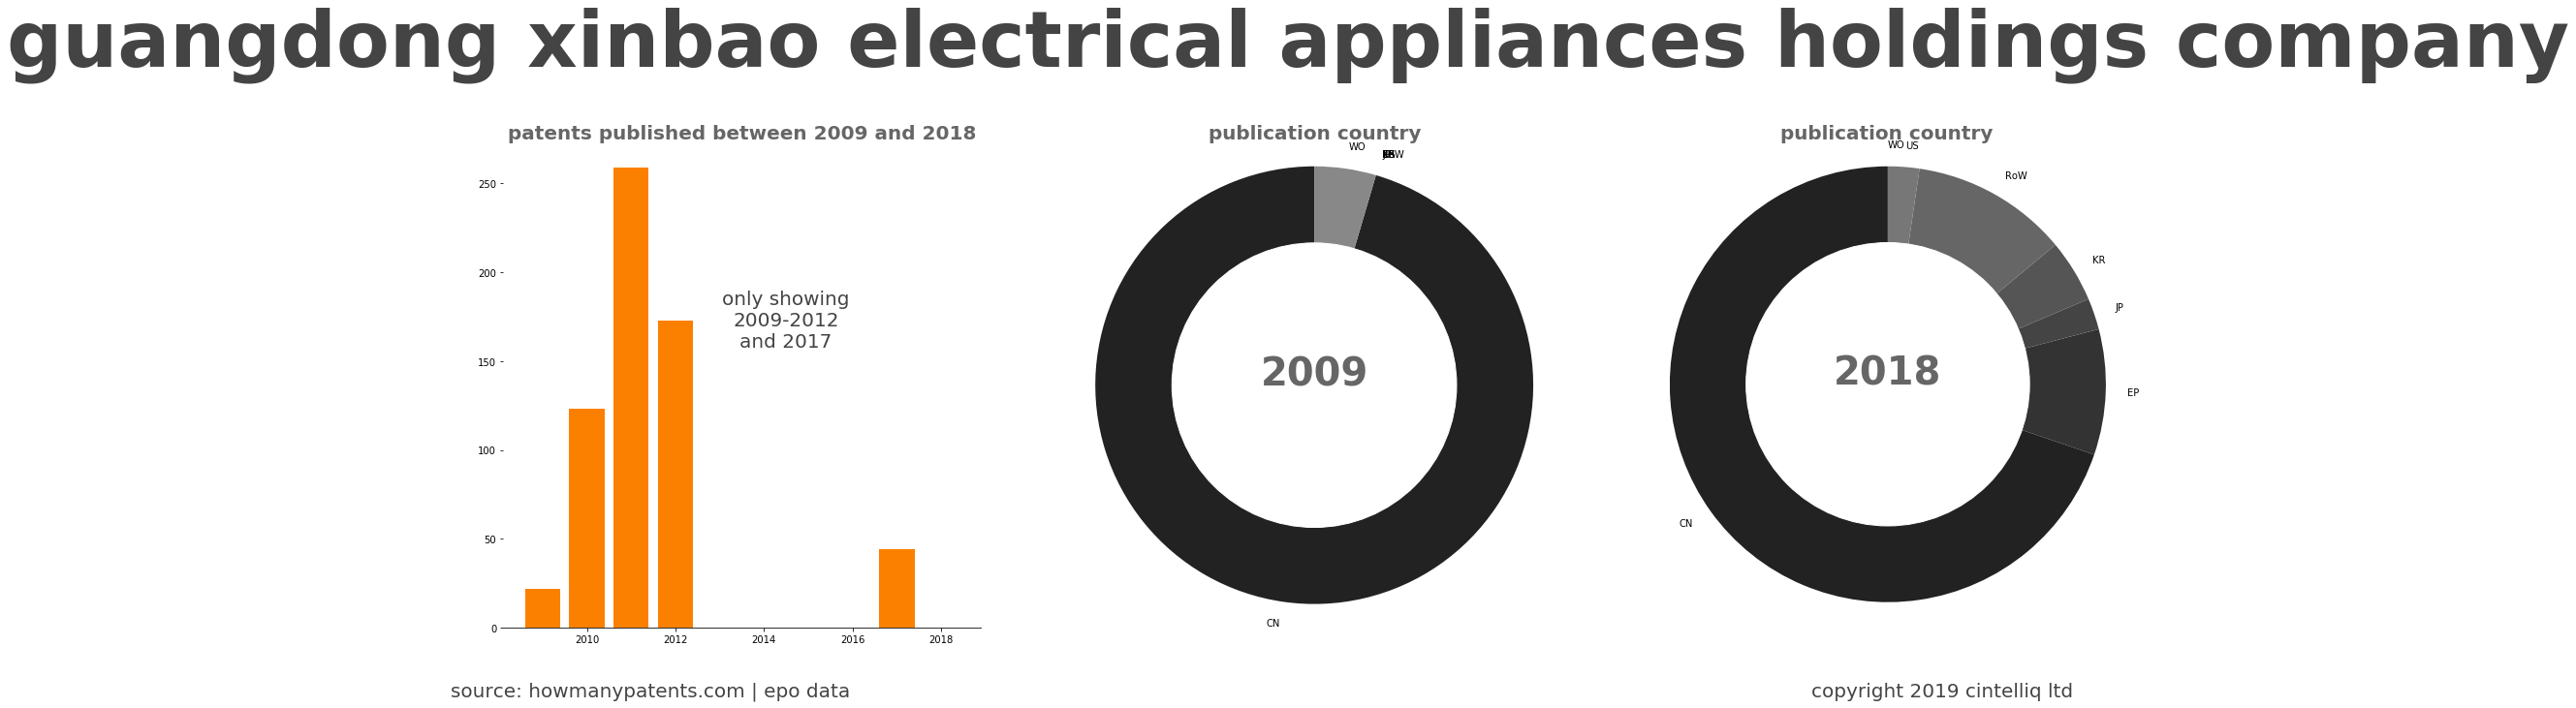 summary of patents for Guangdong Xinbao Electrical Appliances Holdings Company